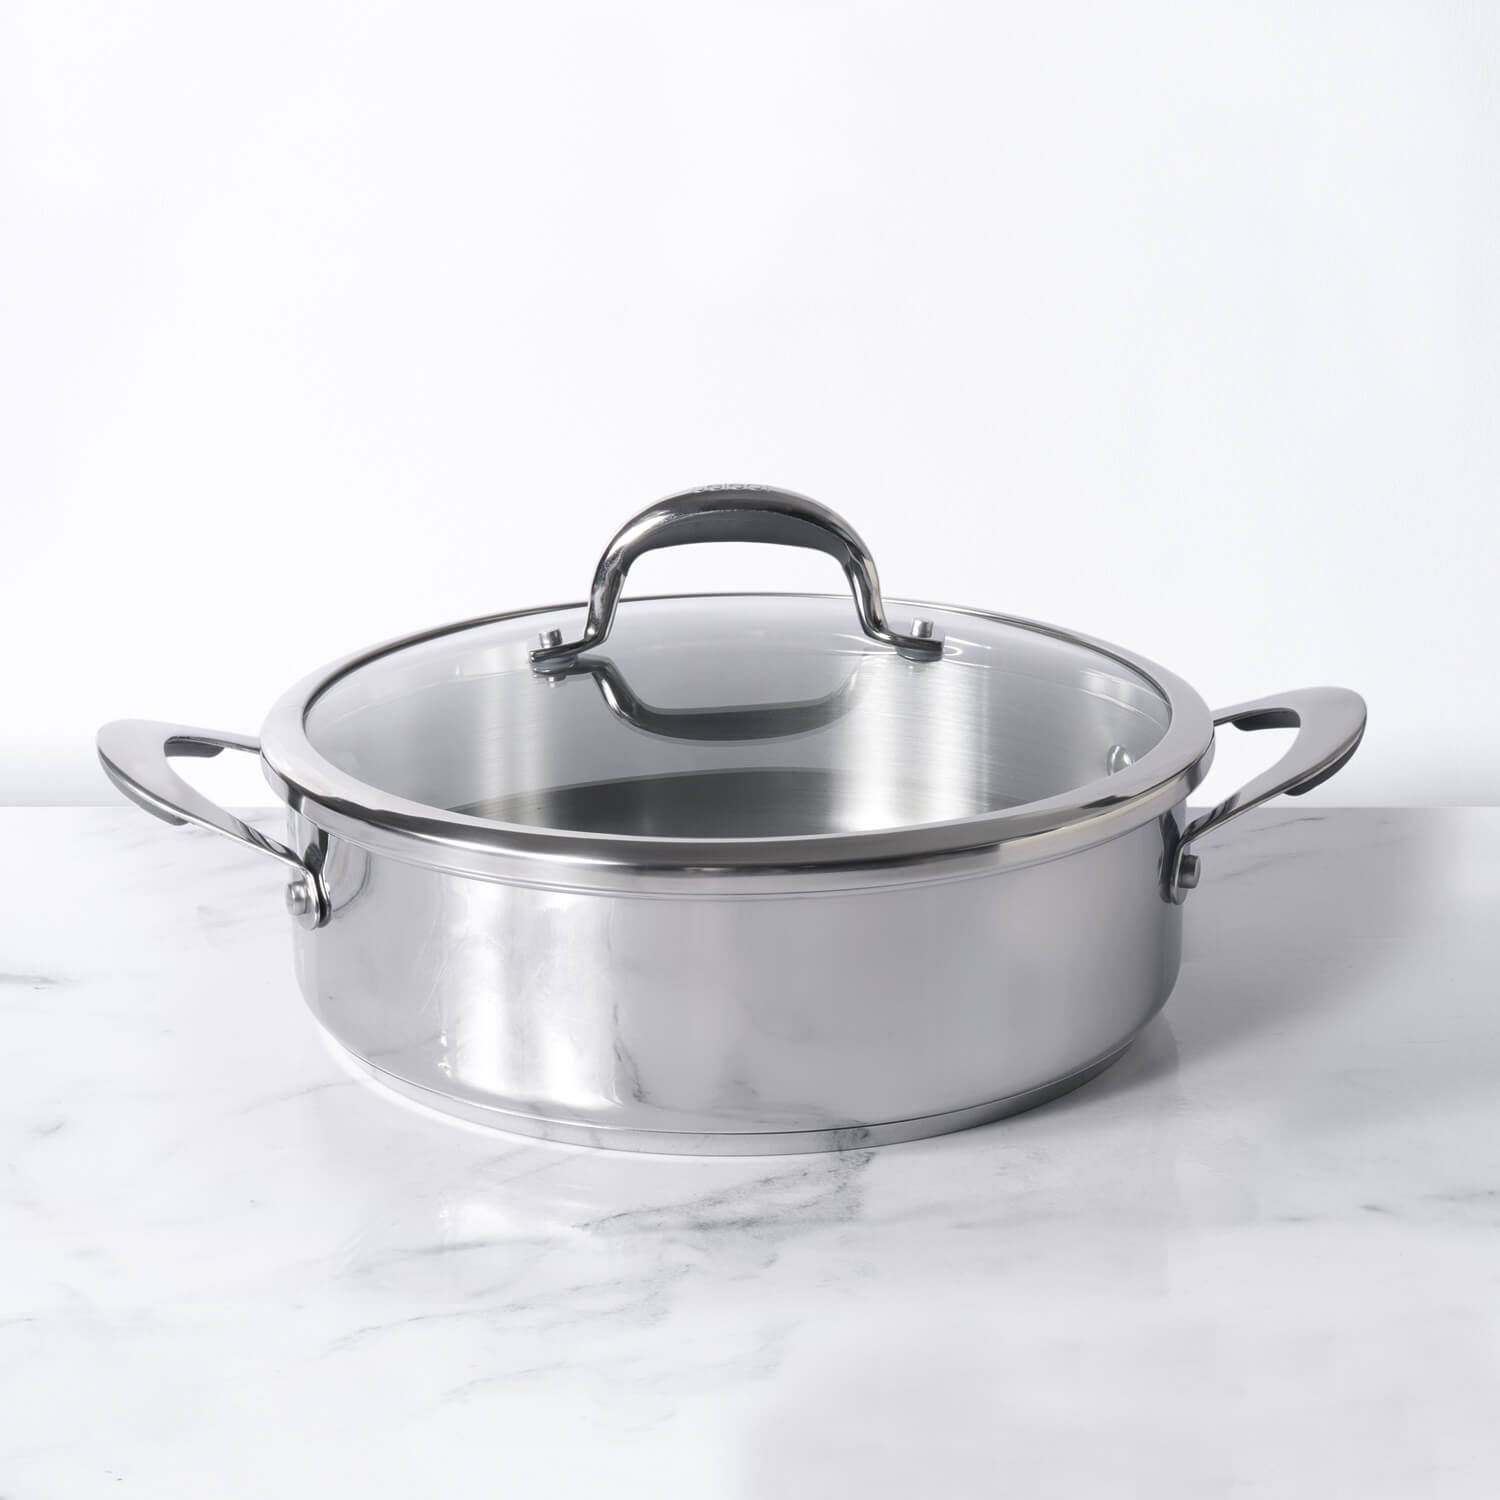 Meyer Select Stainless Steel Sauteuse 28cm (Induction & Gas Compatible)